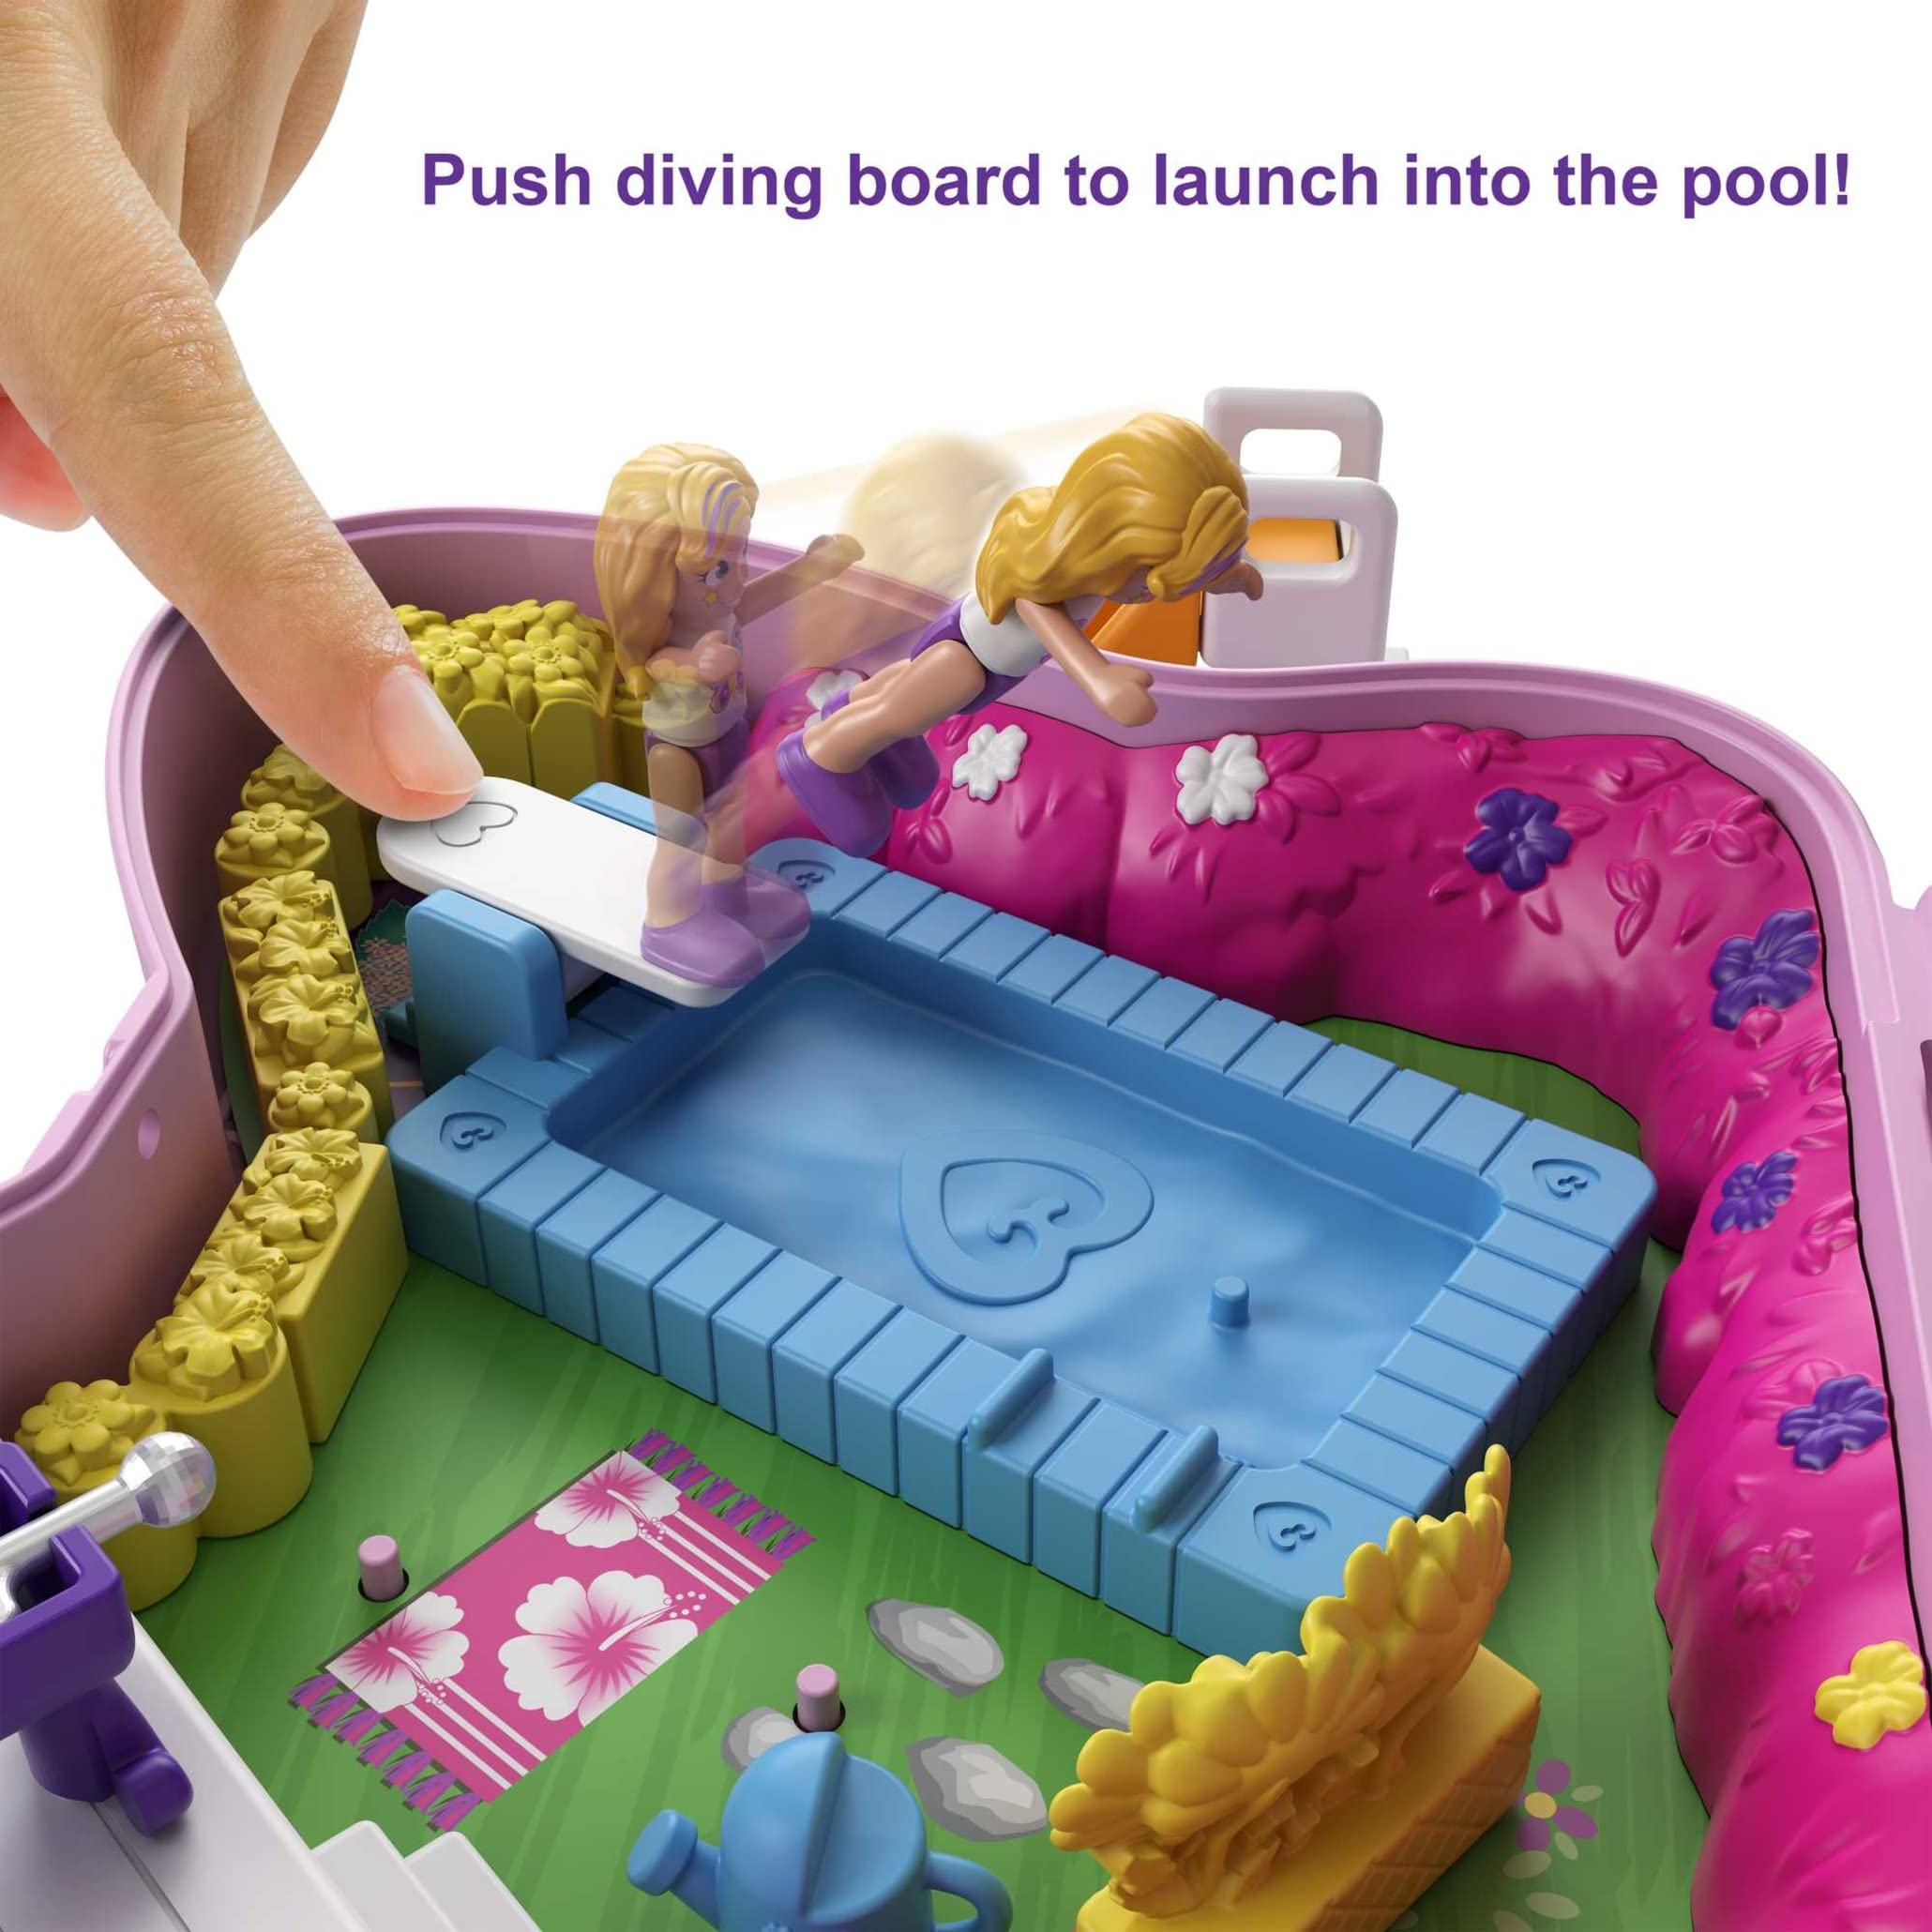 Polly Pocket Compact Playset, Backyard Butterfly with 2 Micro Dolls & Accessories, Travel Toys with Surprise Reveals (Amazon Exclusive)